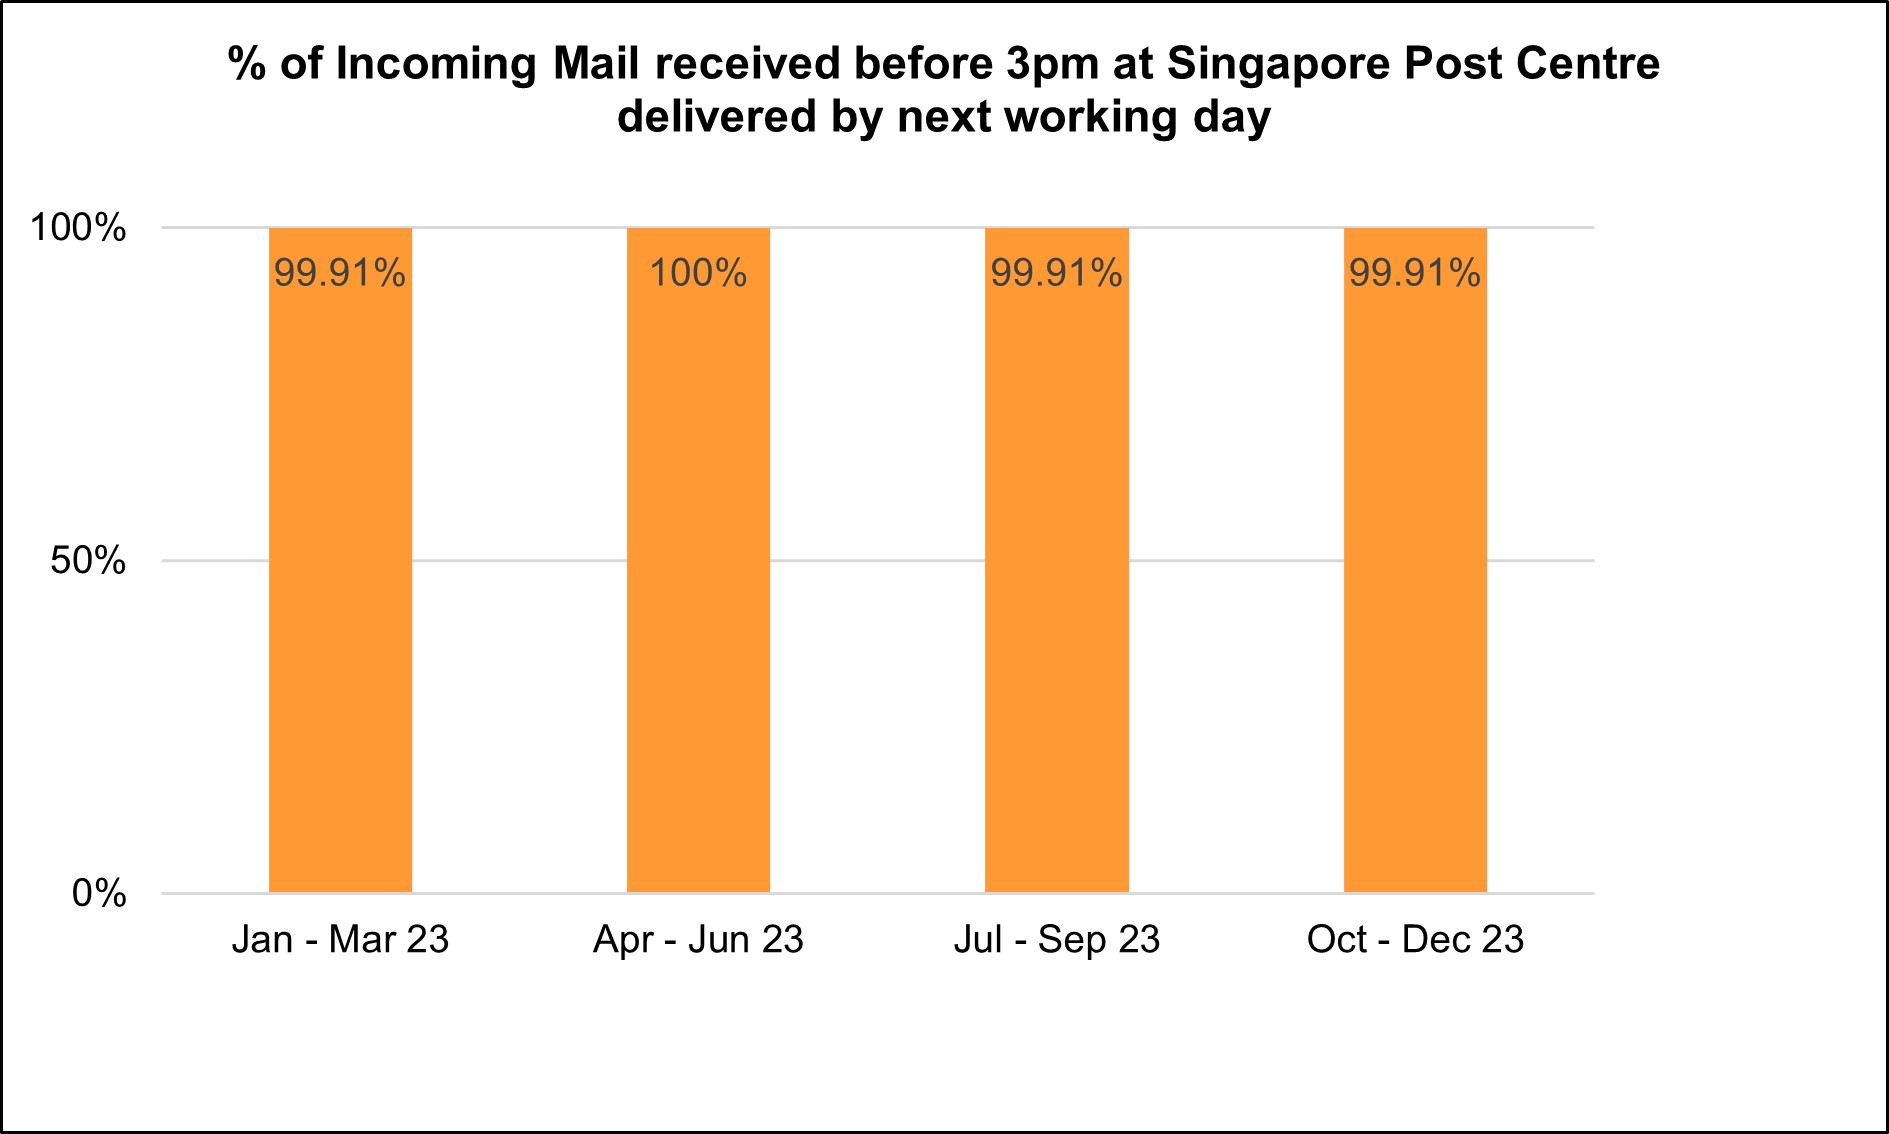 Percentage of mail received before 3pm at Singapore Post Centre delivered by next working day